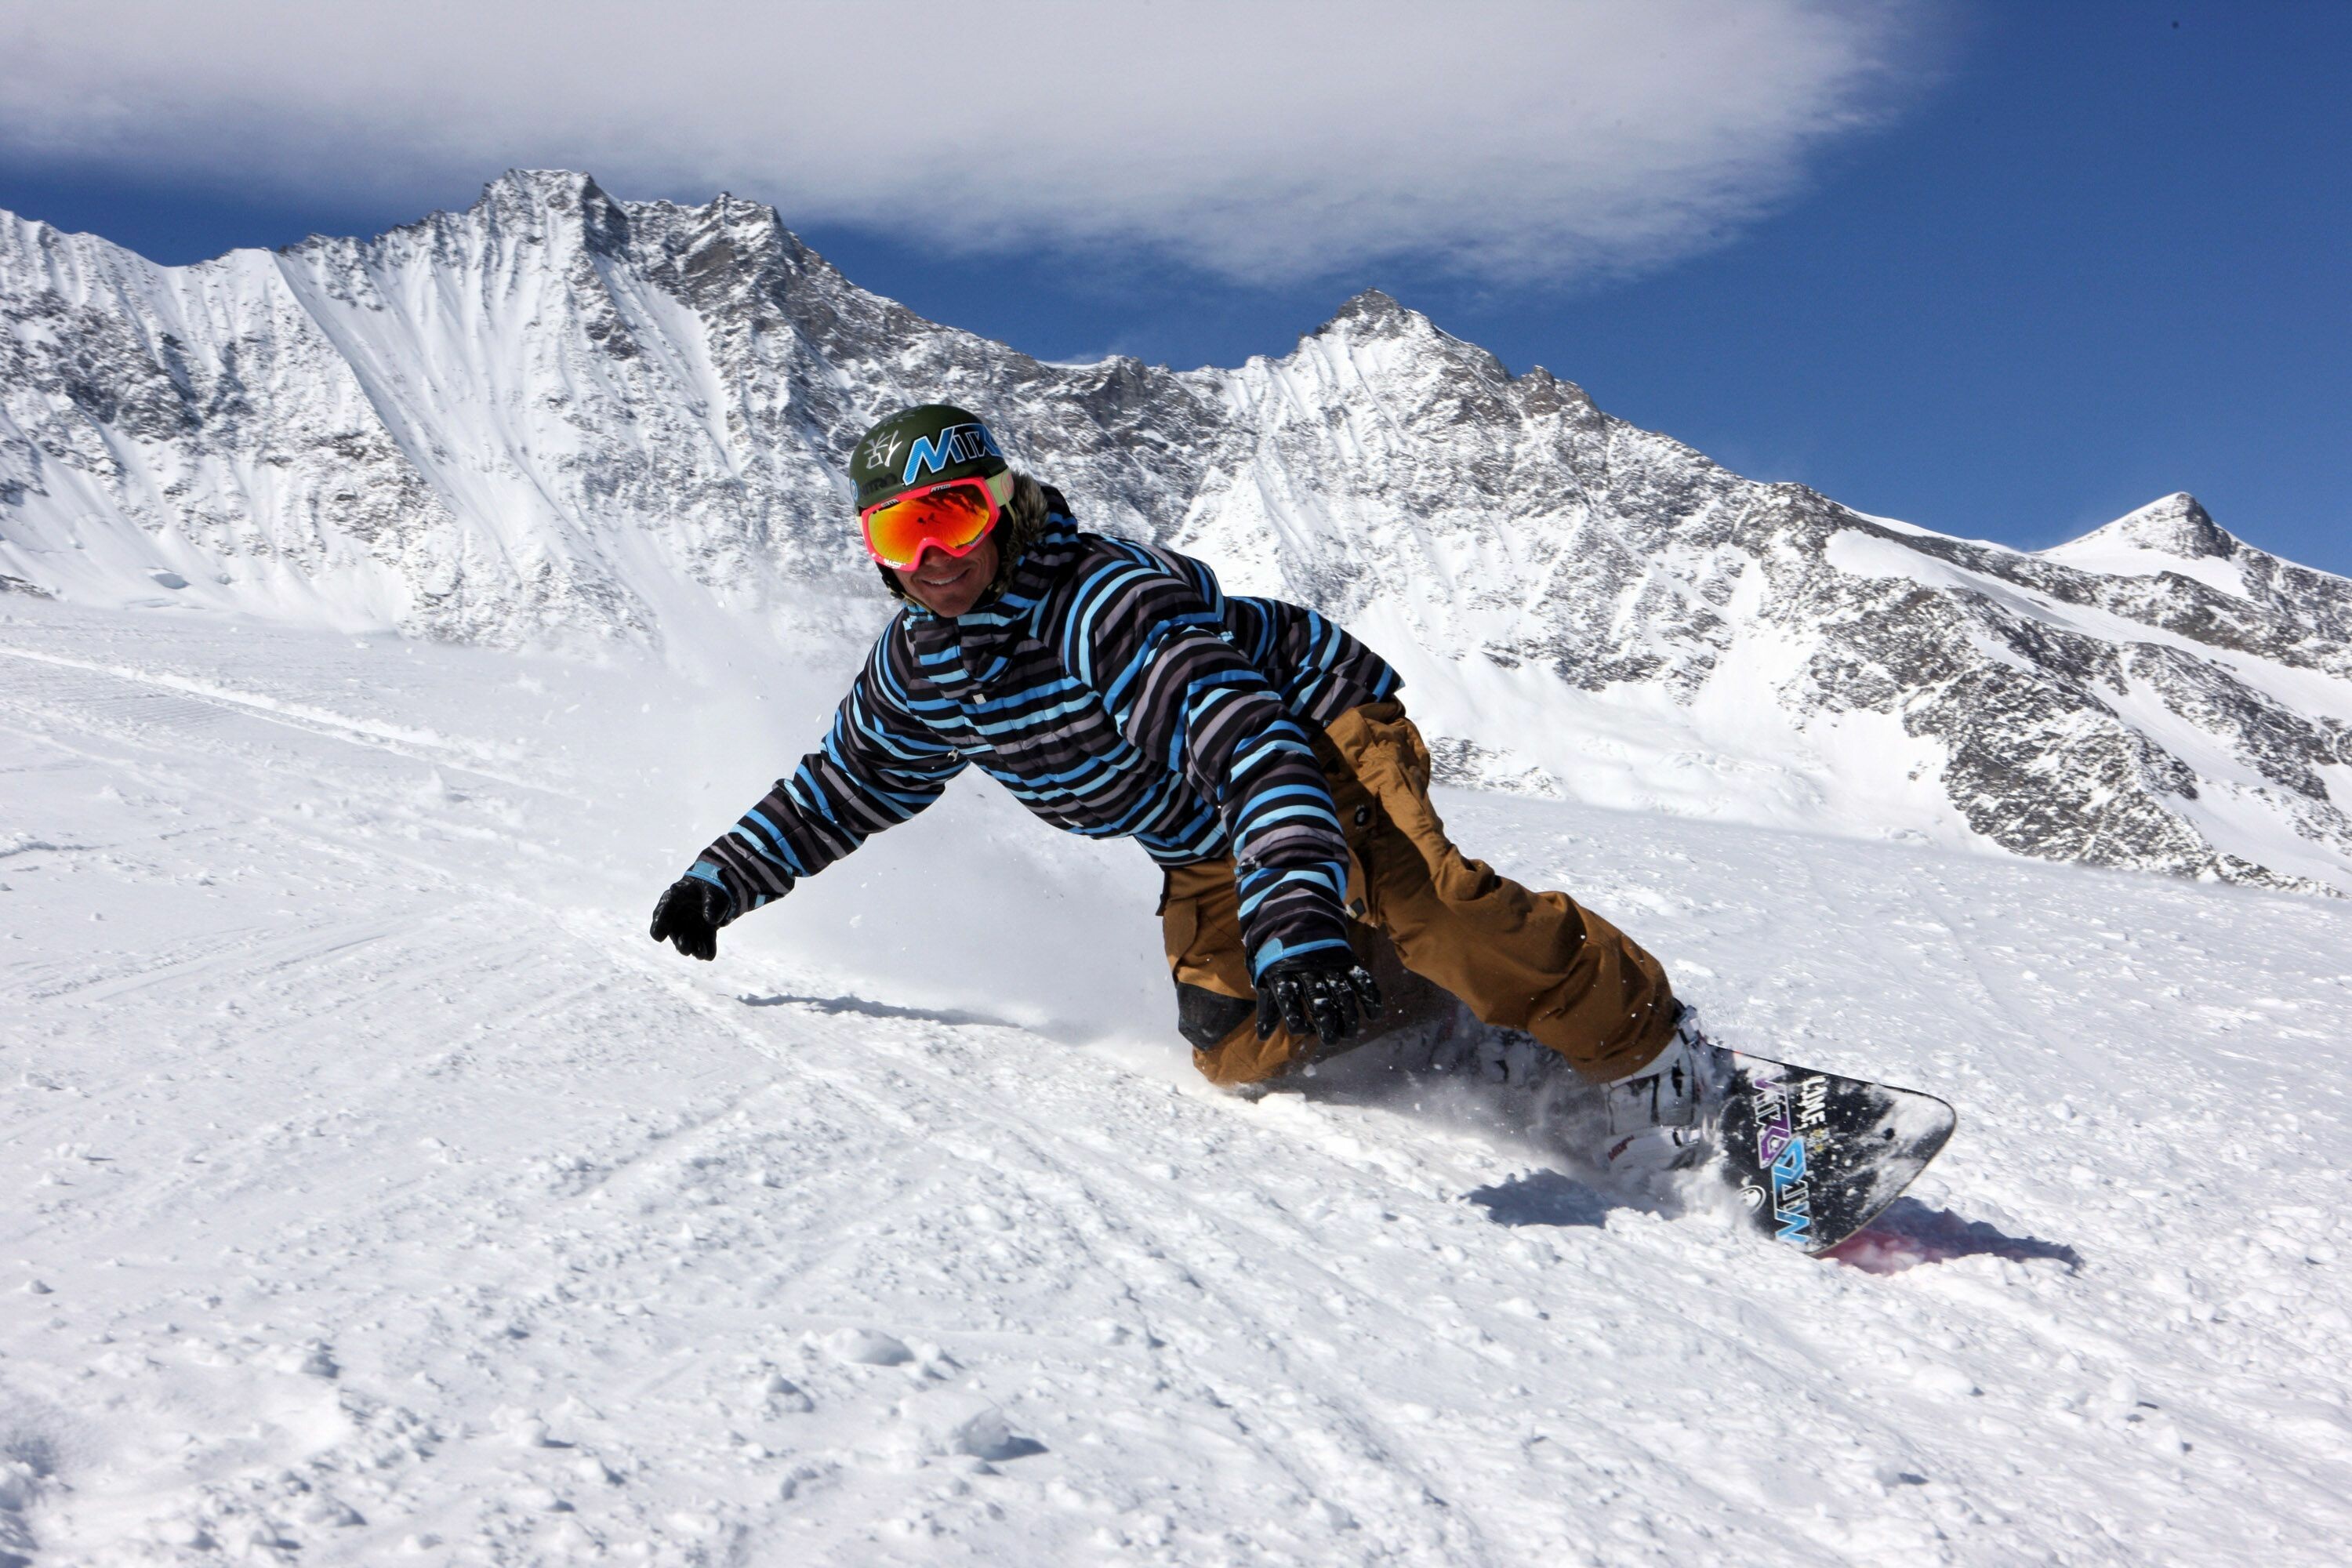 75 Snowboarding Wallpapers Hd 4k 5k For Pc And Mobile Download Free Images For Iphone Android